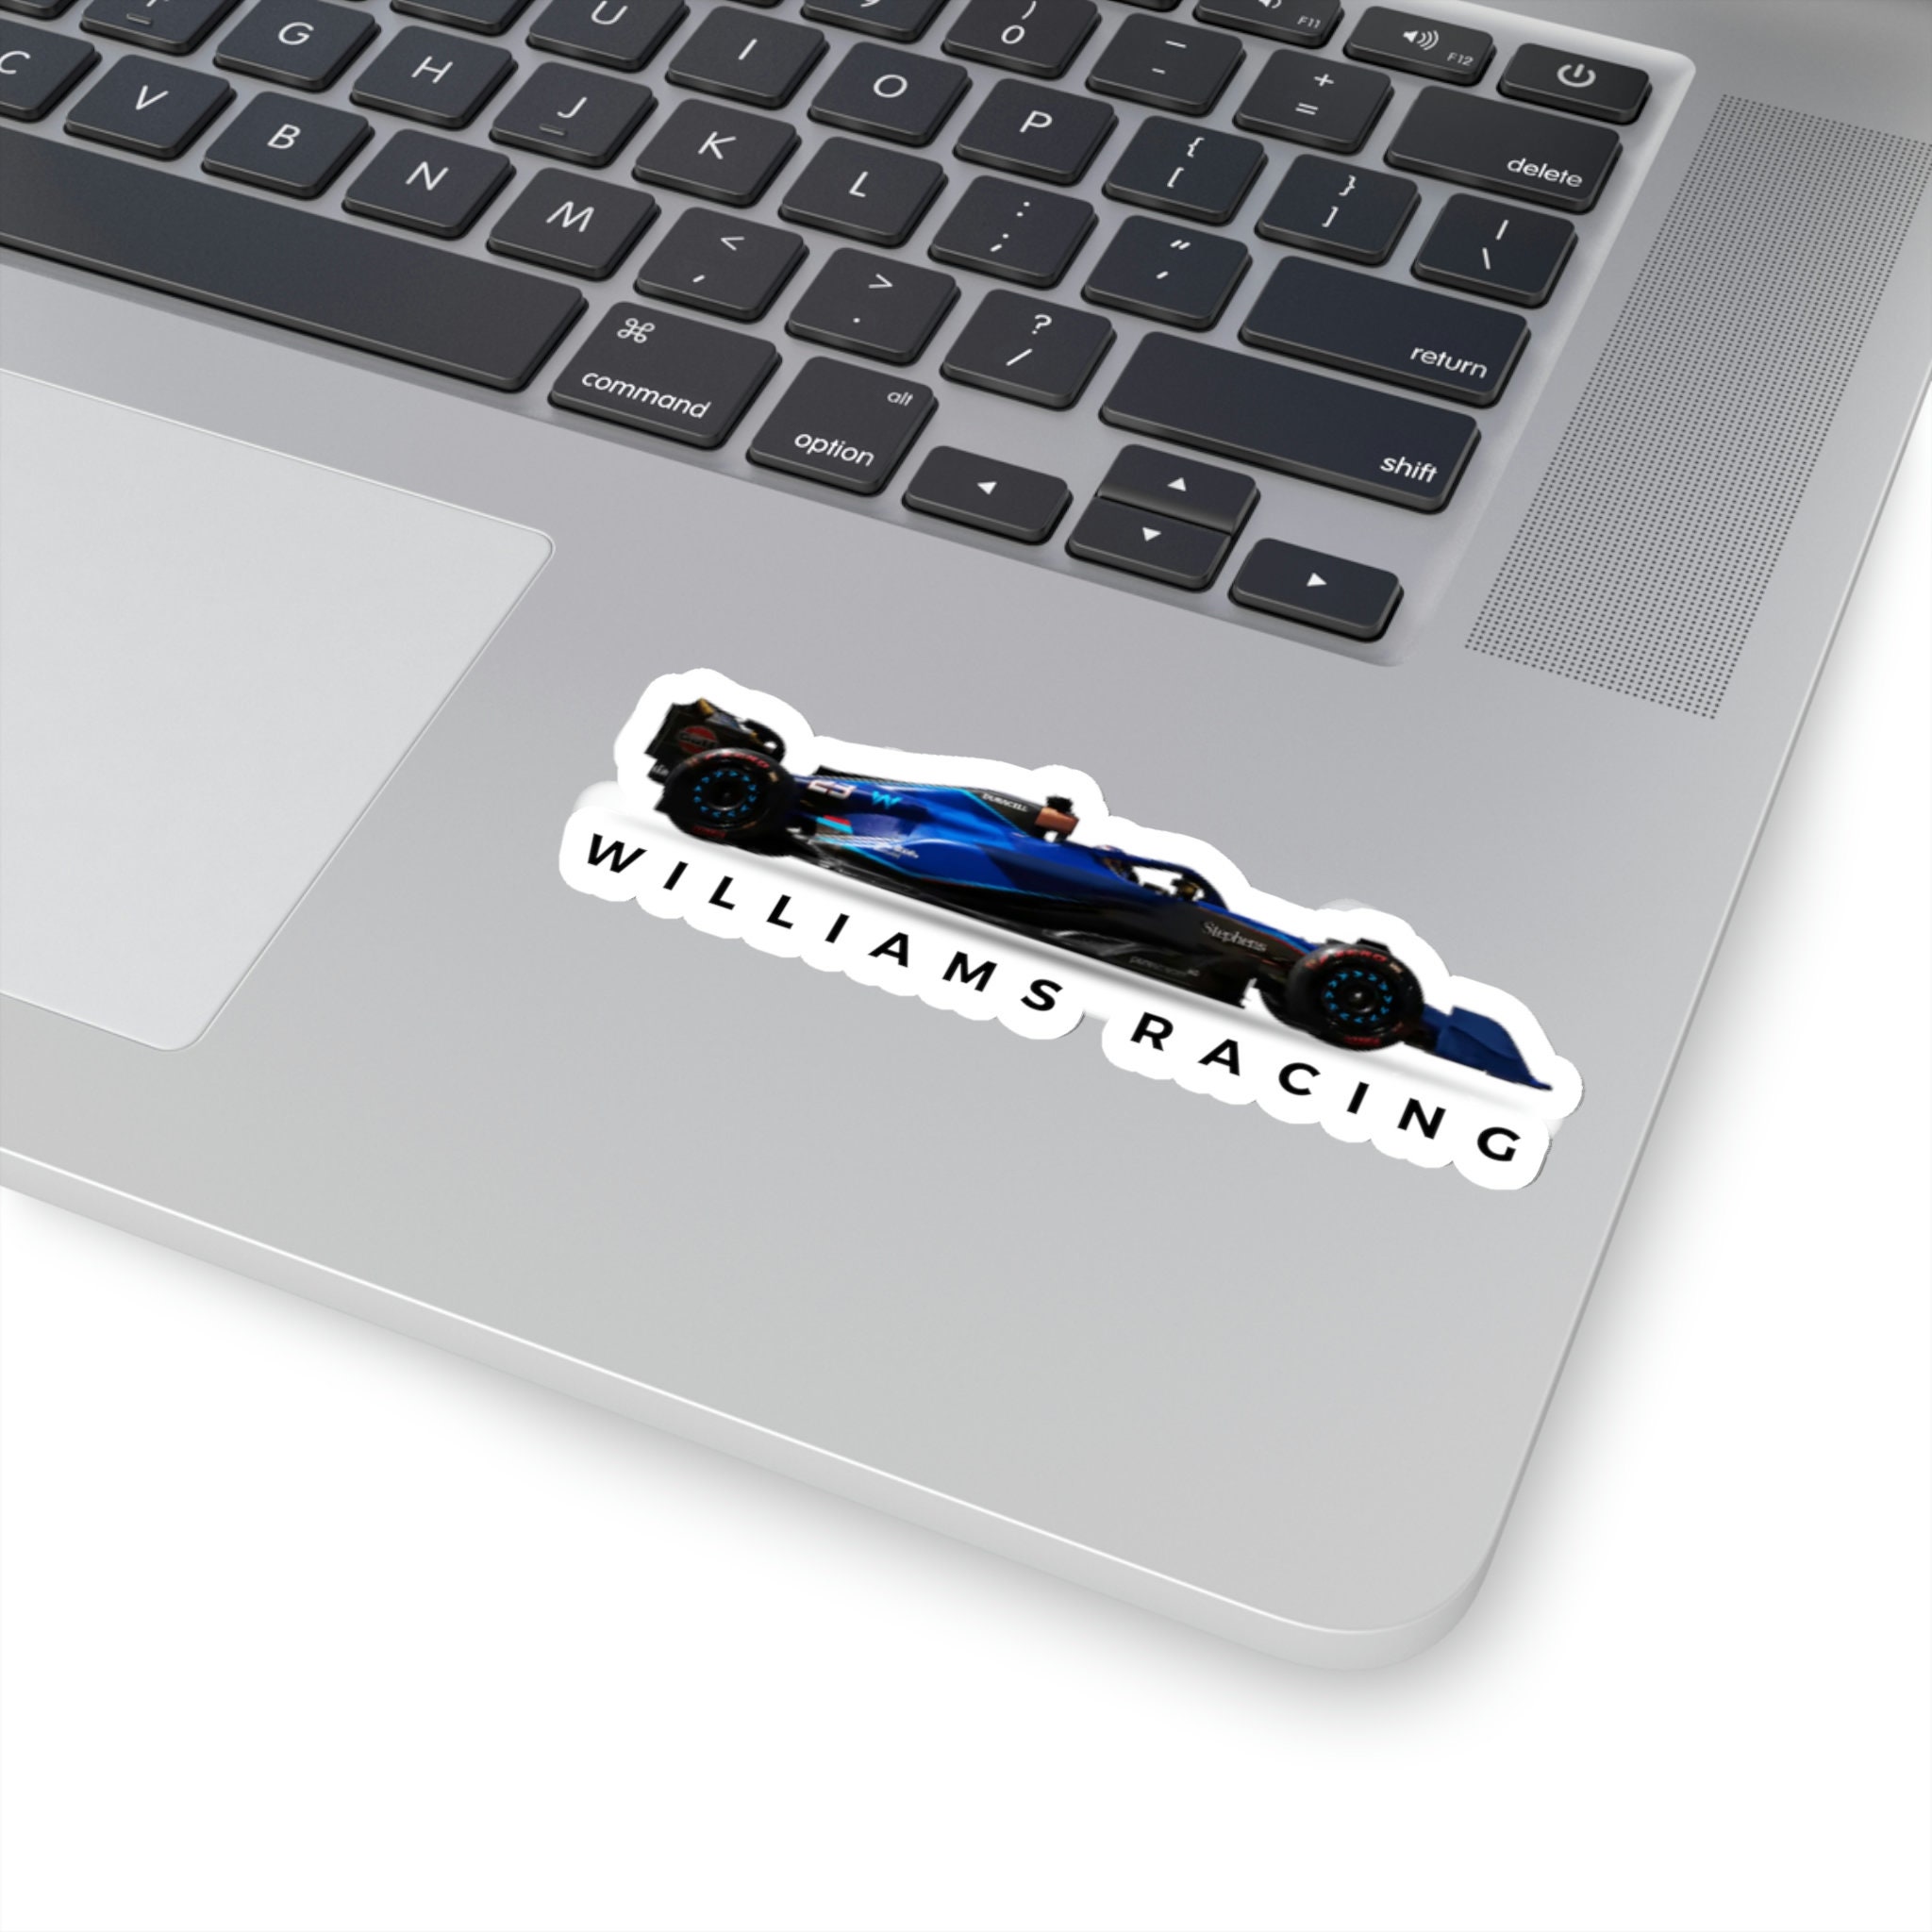 Discover Williams Racing F1 Sticker, Formula 1 Stickers for fans of Alex Albon and Logan Sargeant, Formula One Decal